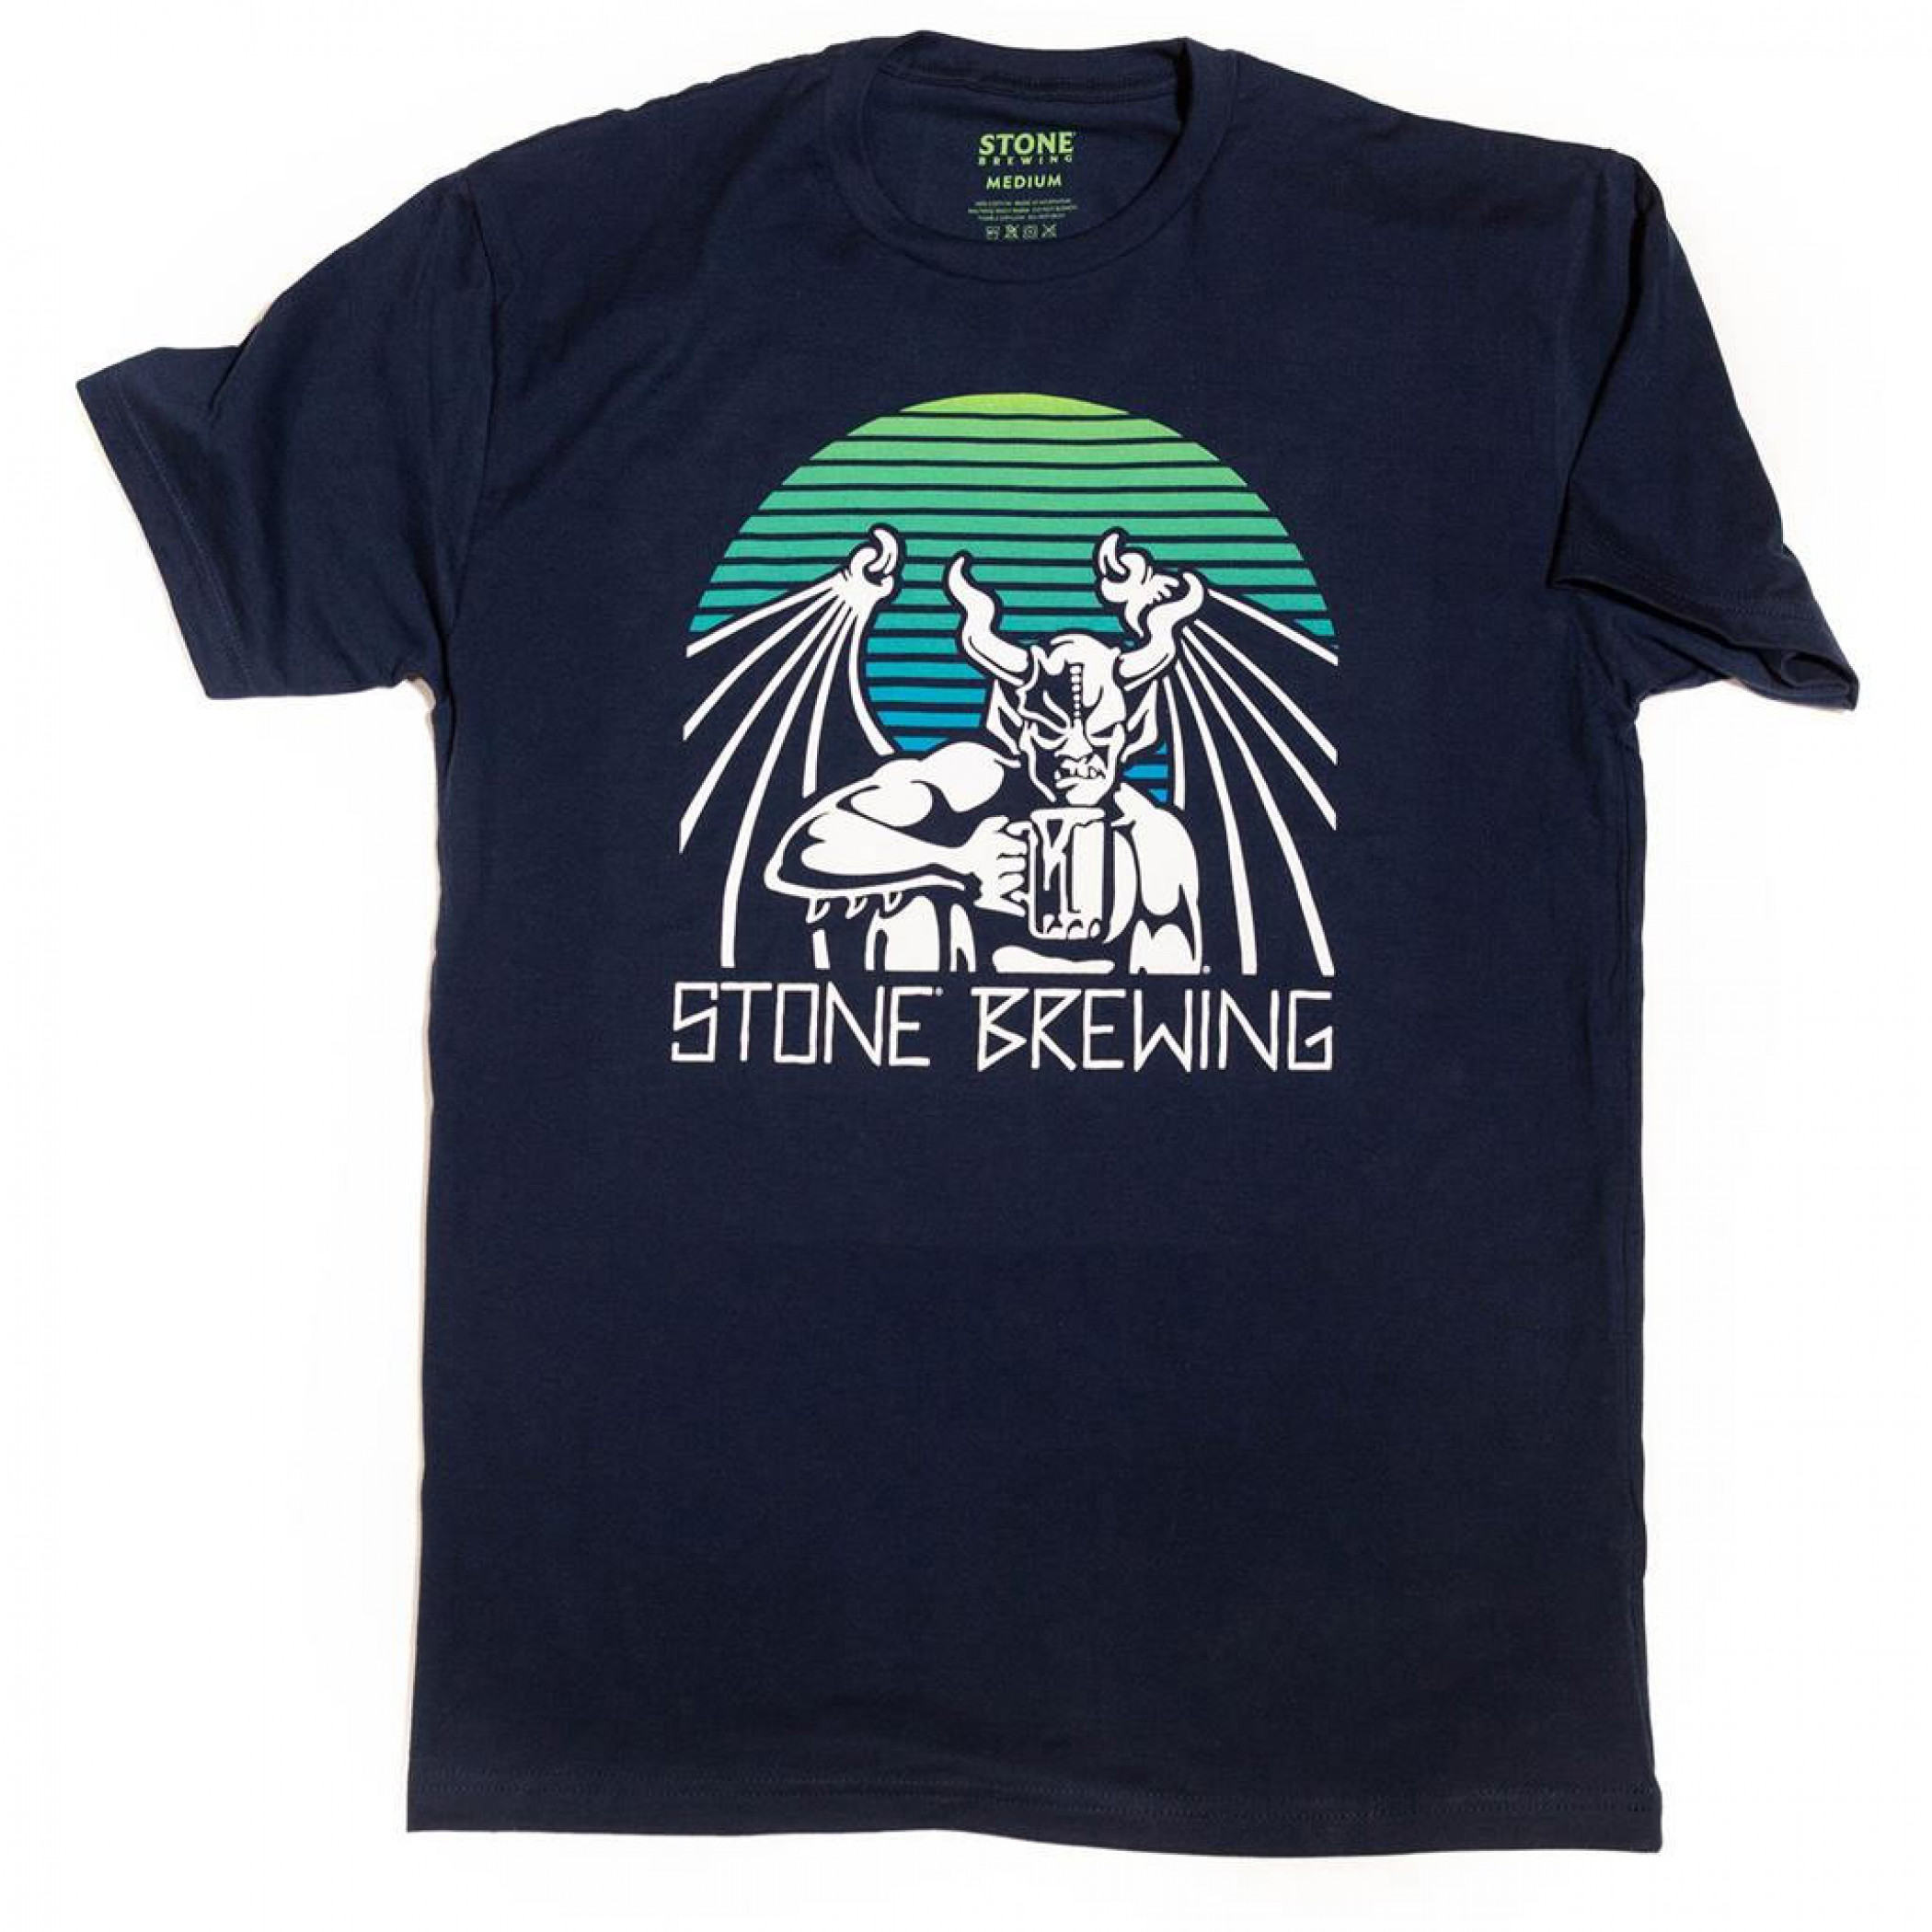 stone brewing t shirt